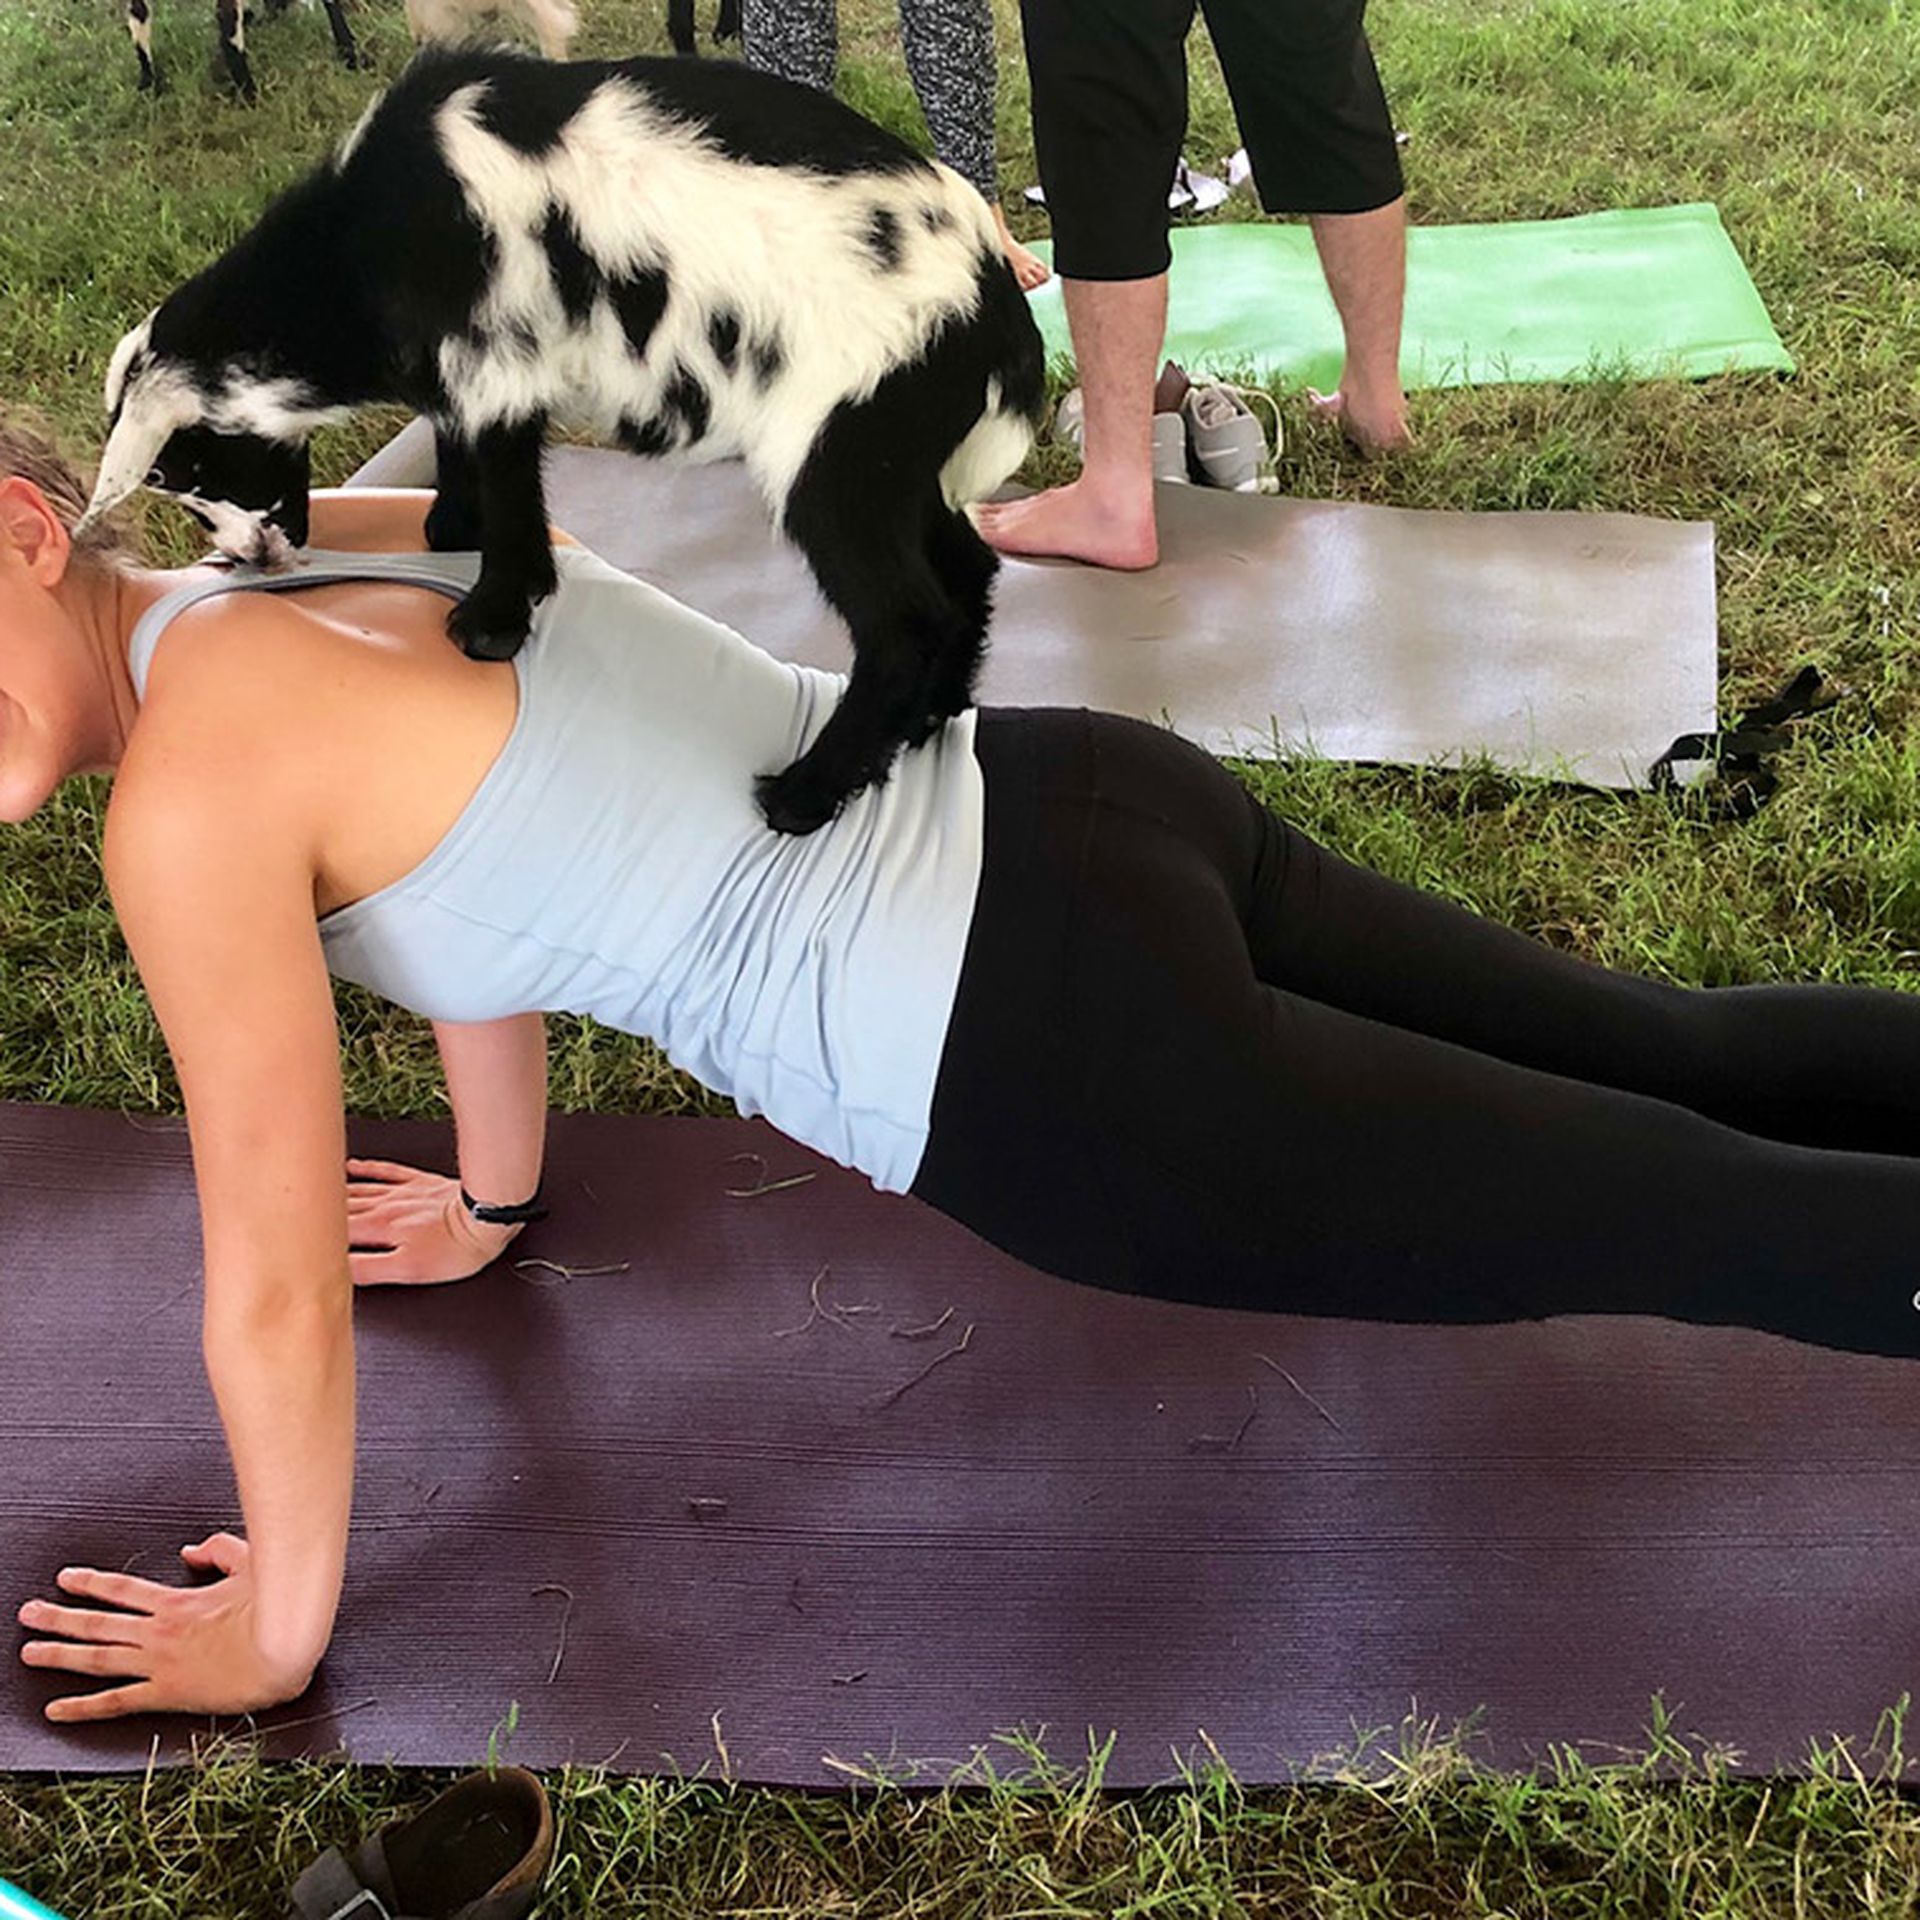 Photos: Is 'Yoga with Pigs' the latest craze?